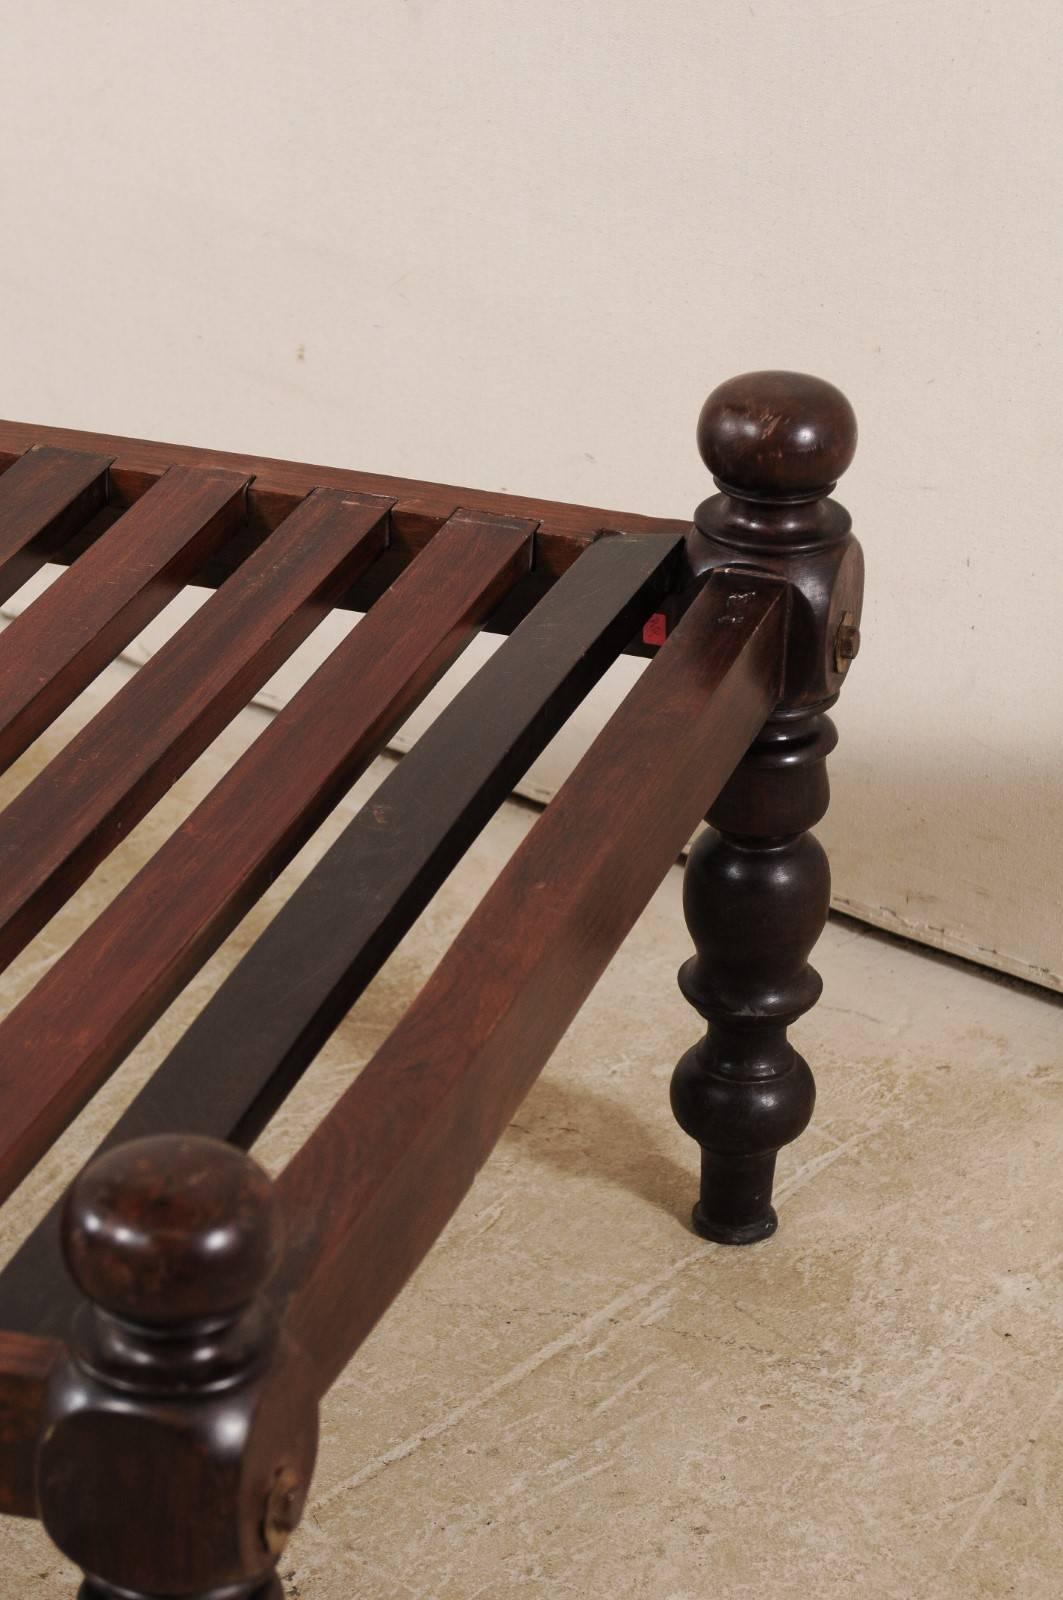 Carved British Colonial Midcentury Slat Wood Daybed from India with Turned Legs